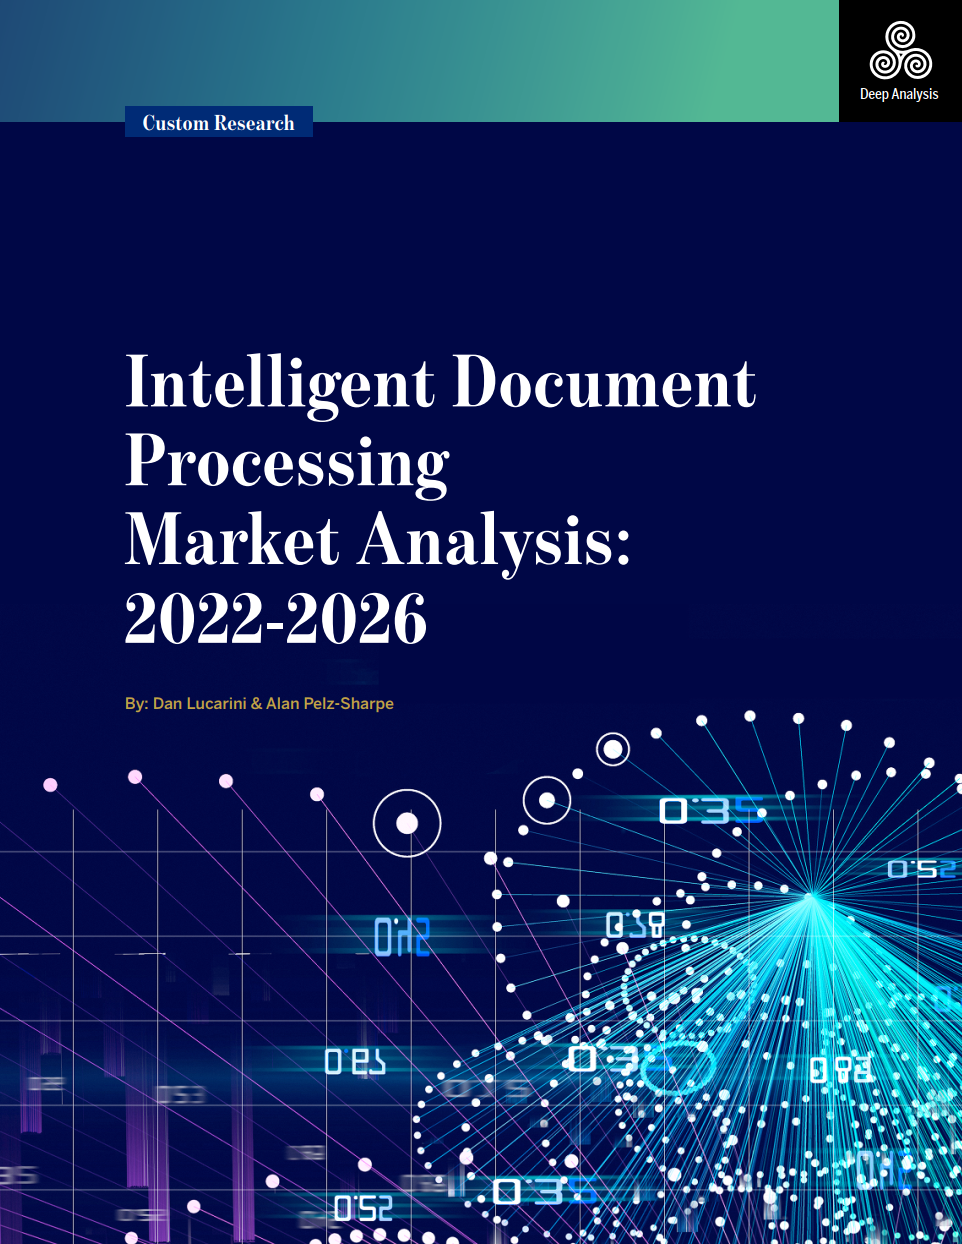 A cover of a report about the Intelligent Document Processing Market Analysis